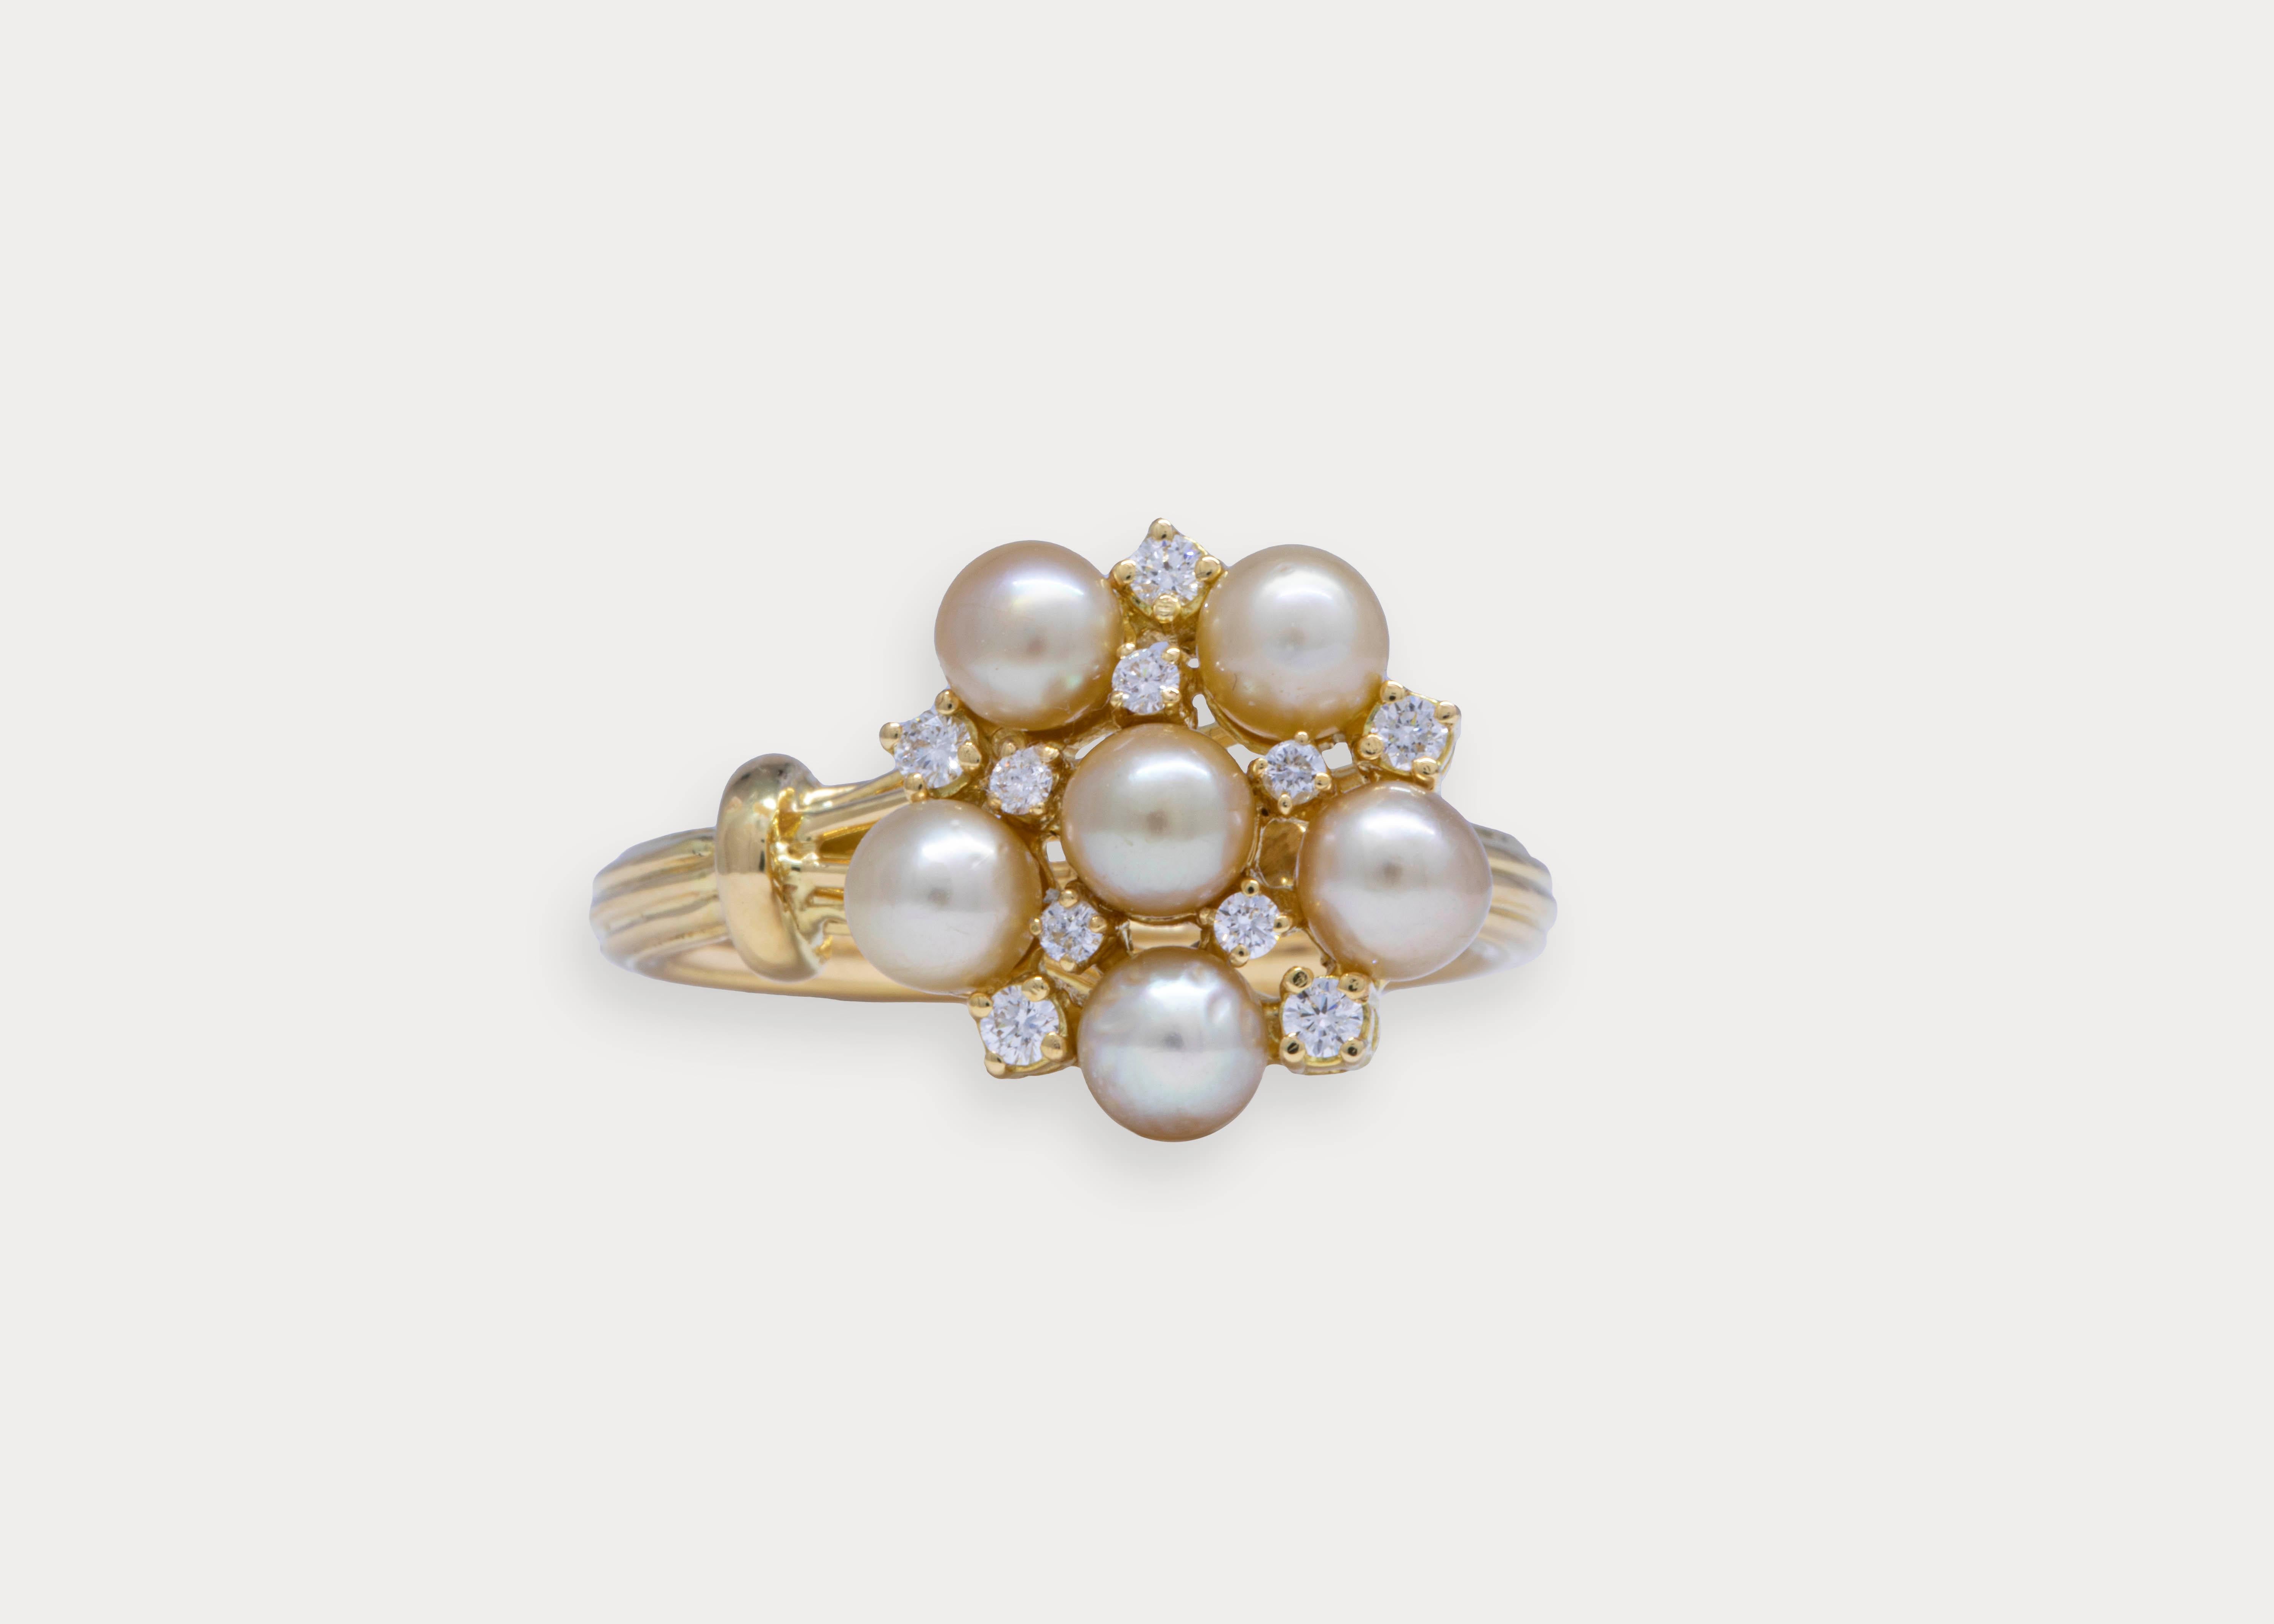 A flower stem wraps elegantly around your fingers.
The petals are 3.98 ct. of lustrous cream colored Bahraini natural pearls with scattered VS1 round diamonds in between.

Gold Weight: 7.94 g
6 Pearls Weight: 3.98 ct.
Diamond Weight: 0.19 ct.